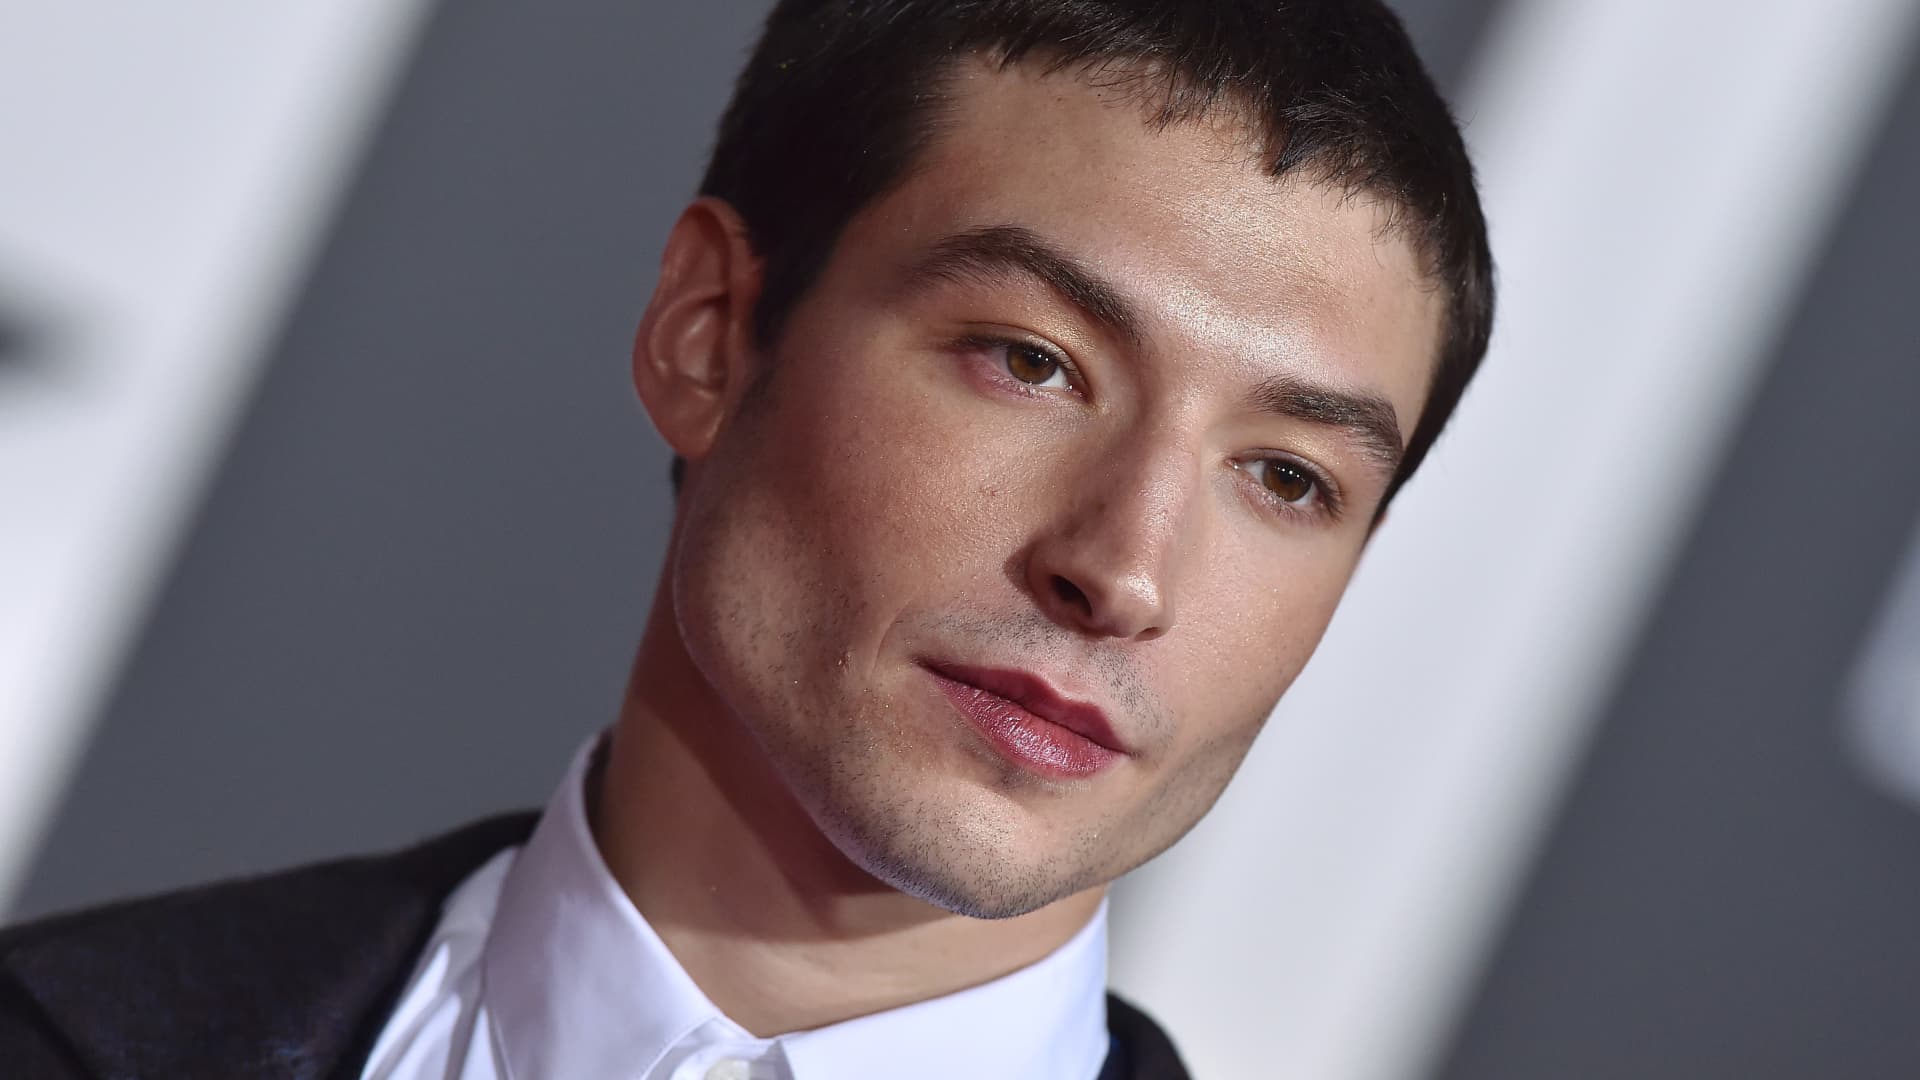 Ezra Miller charged with felony housebreaking days after Warner Bros Discovery CEO Zaslav praises ‘Flash’ film